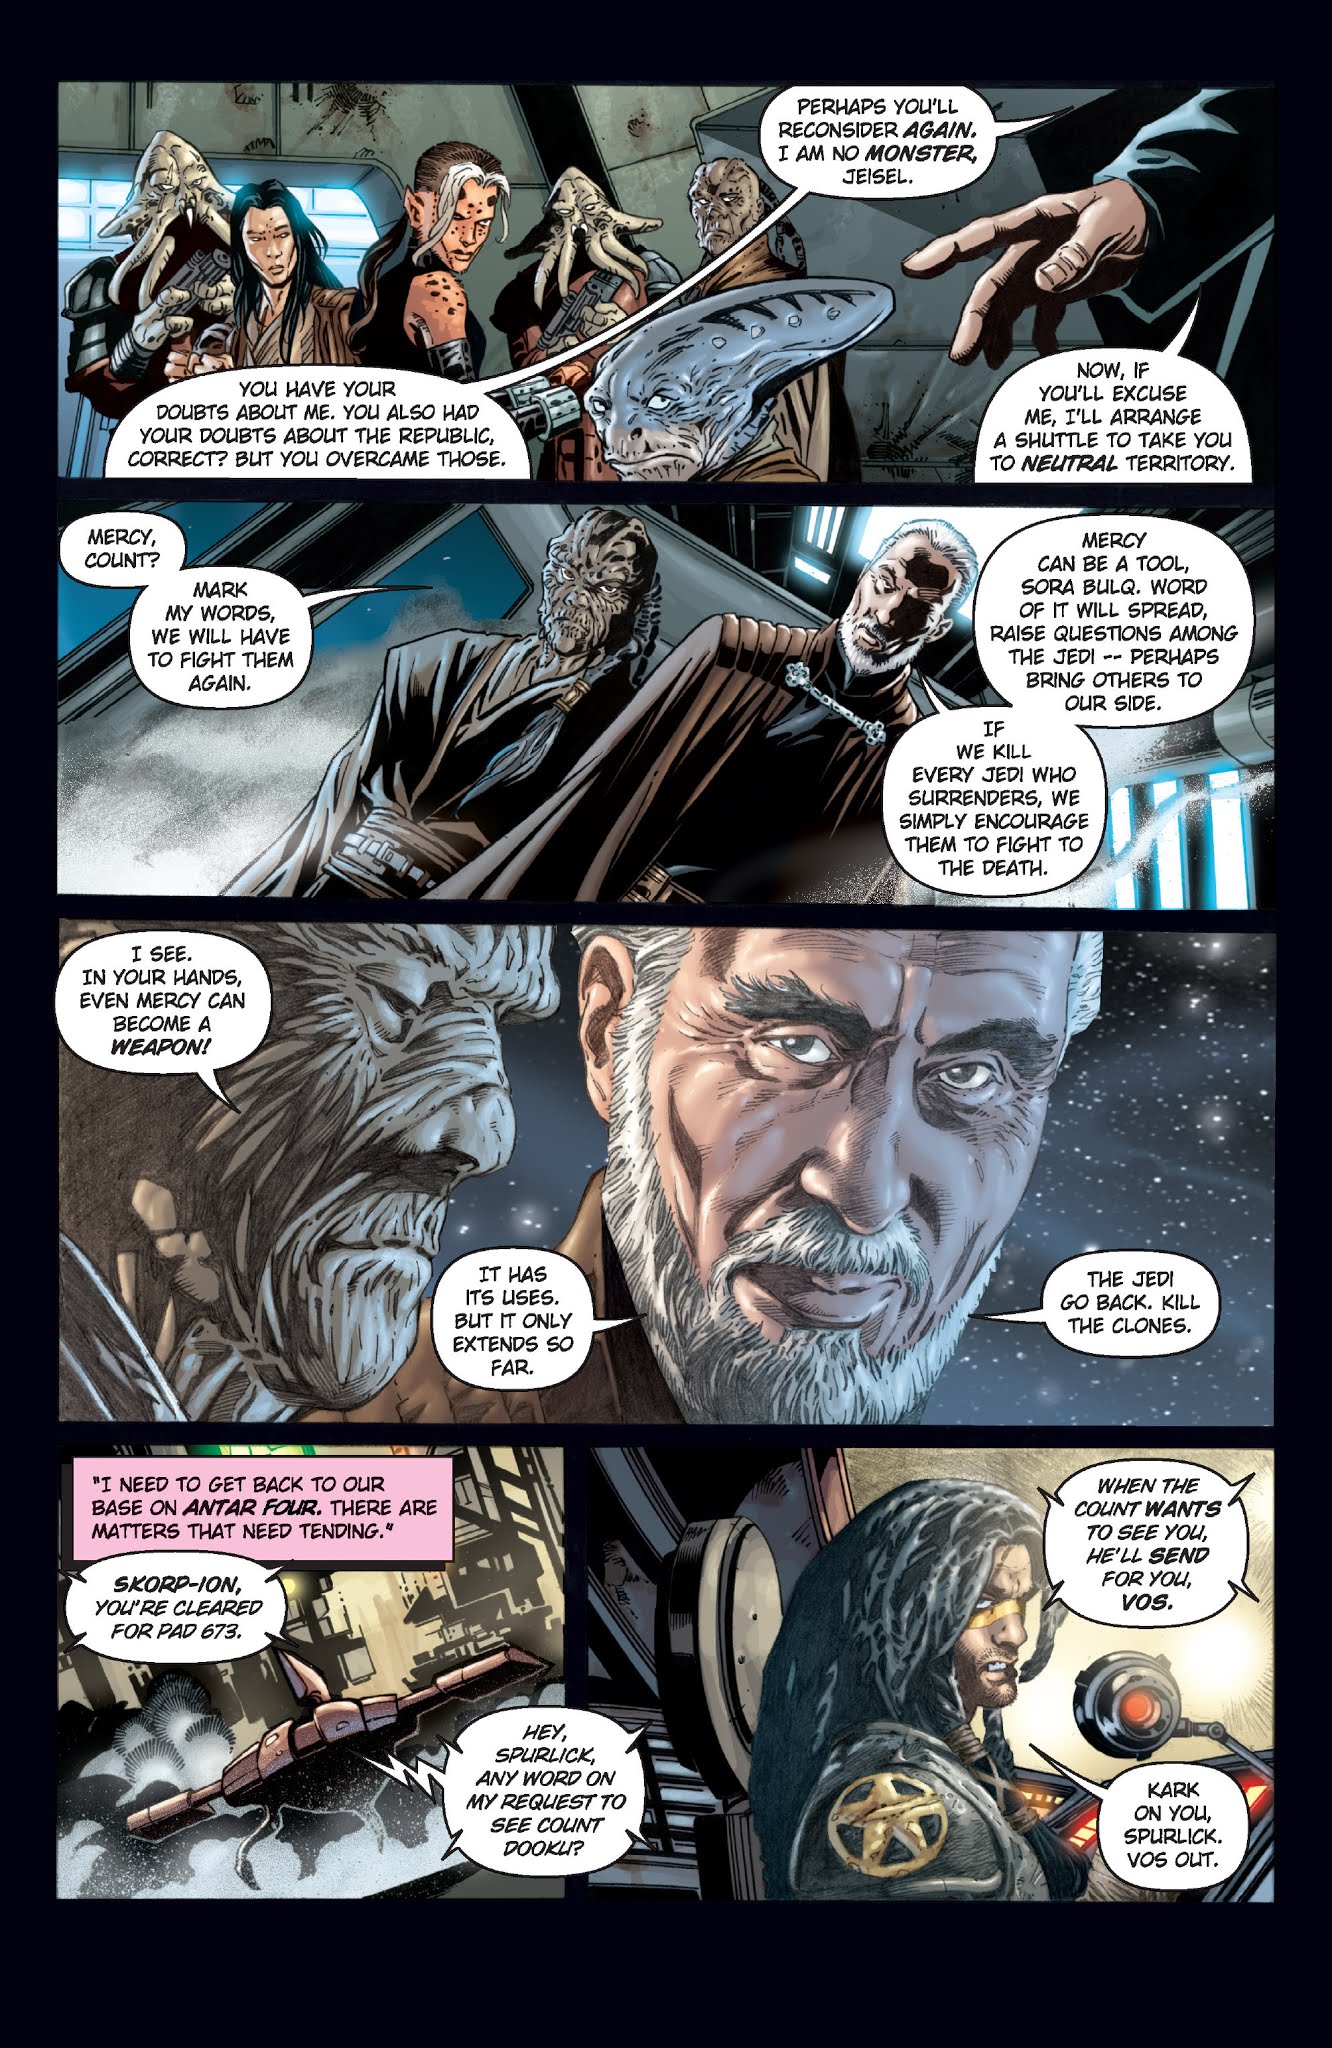 Read online Star Wars: Jedi comic -  Issue # Issue Count Dooku - 5